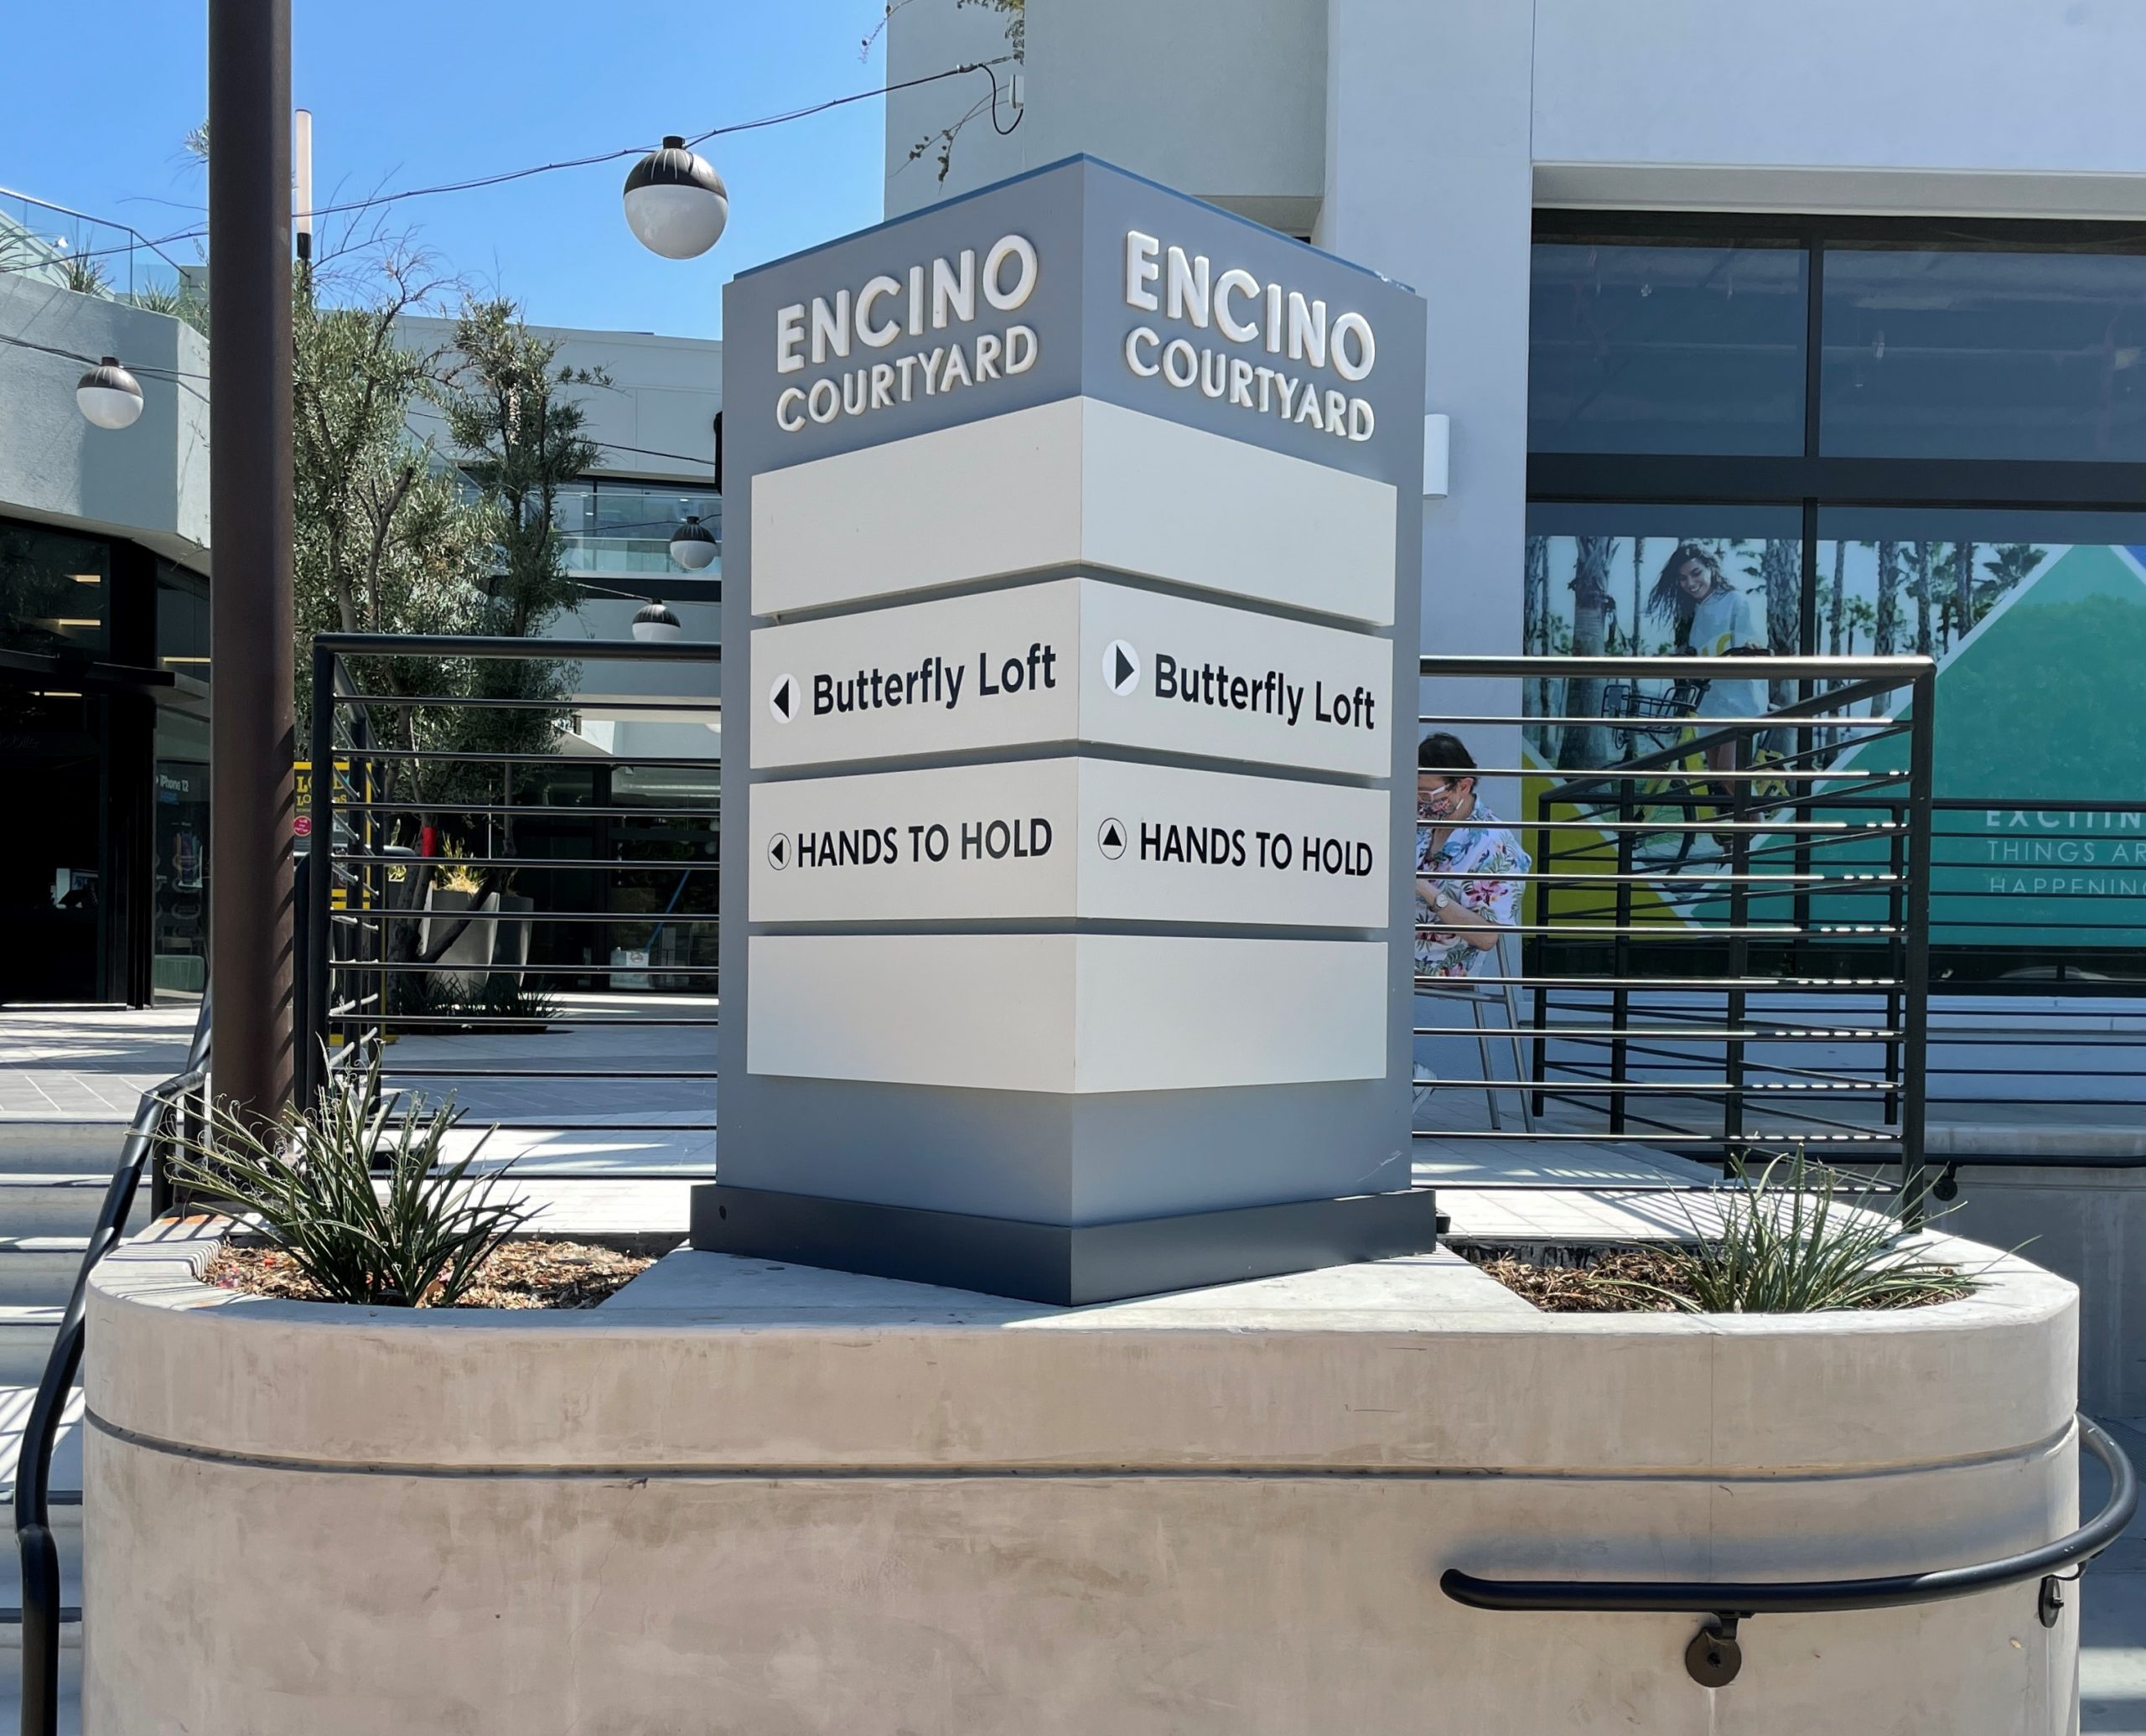 Businesses in commercial spaces can use outdoor wayfinding signs to guide customers. Like these signs for Hands to Hold's Encino Courtyard branch.